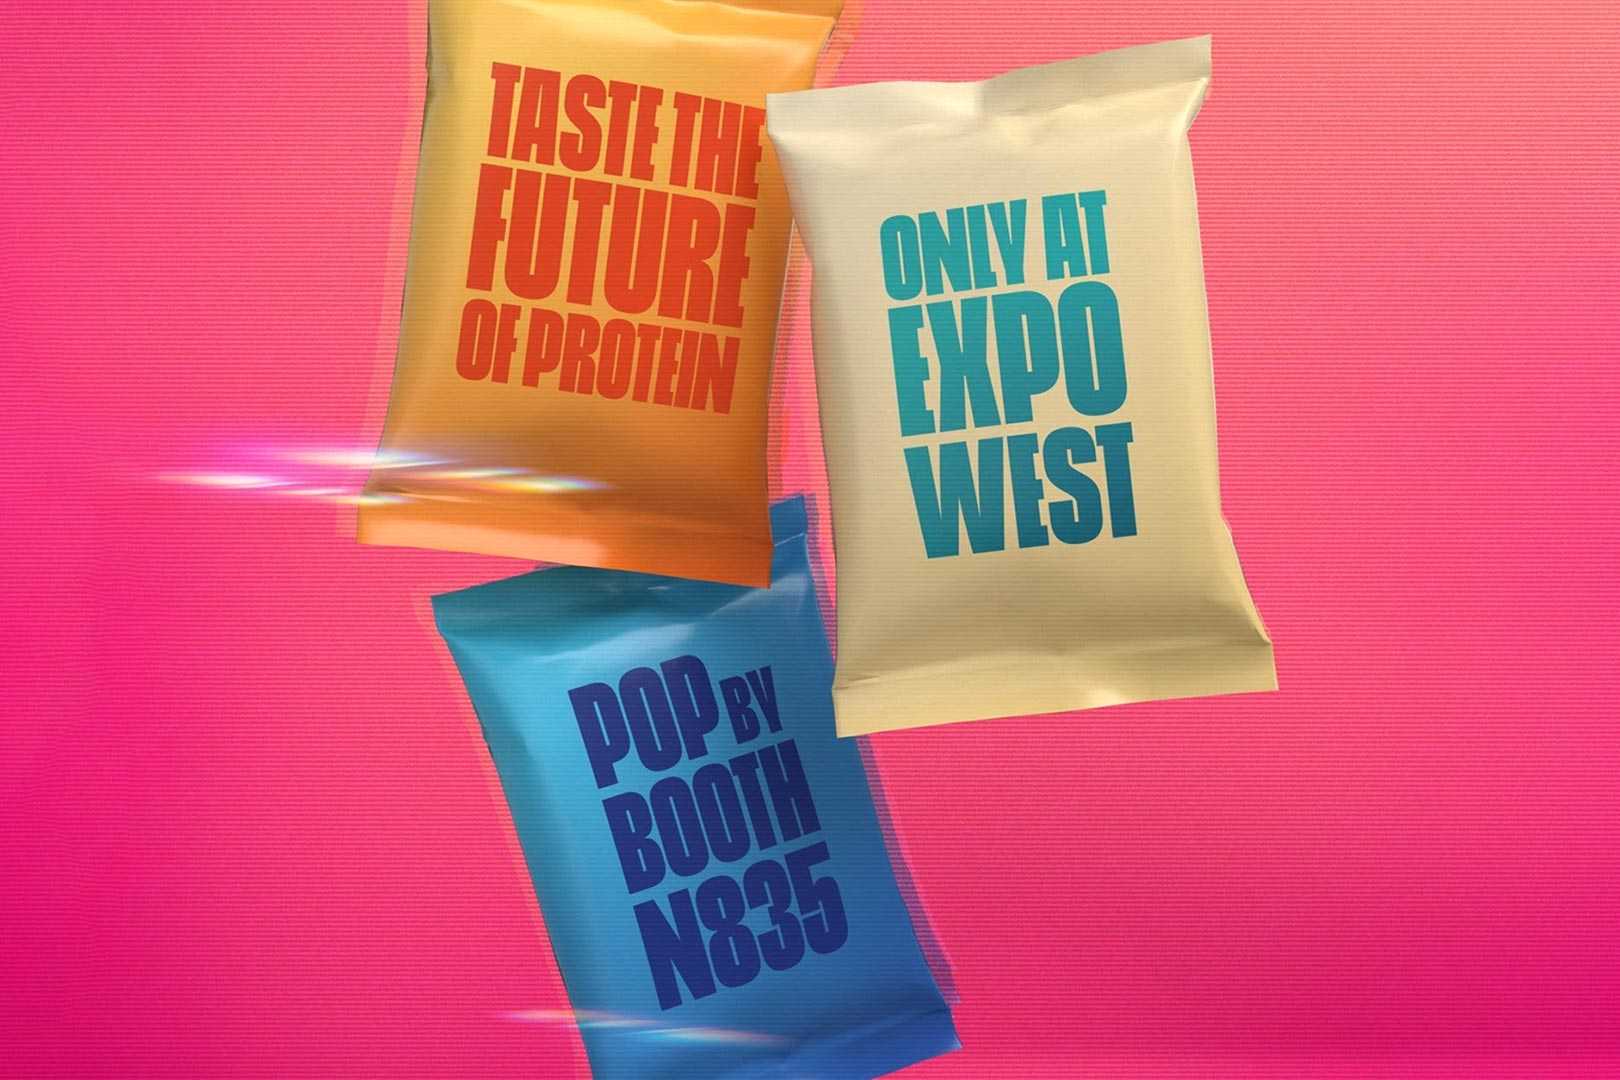 Legendary Foods Teases Protein Snack For Expo West